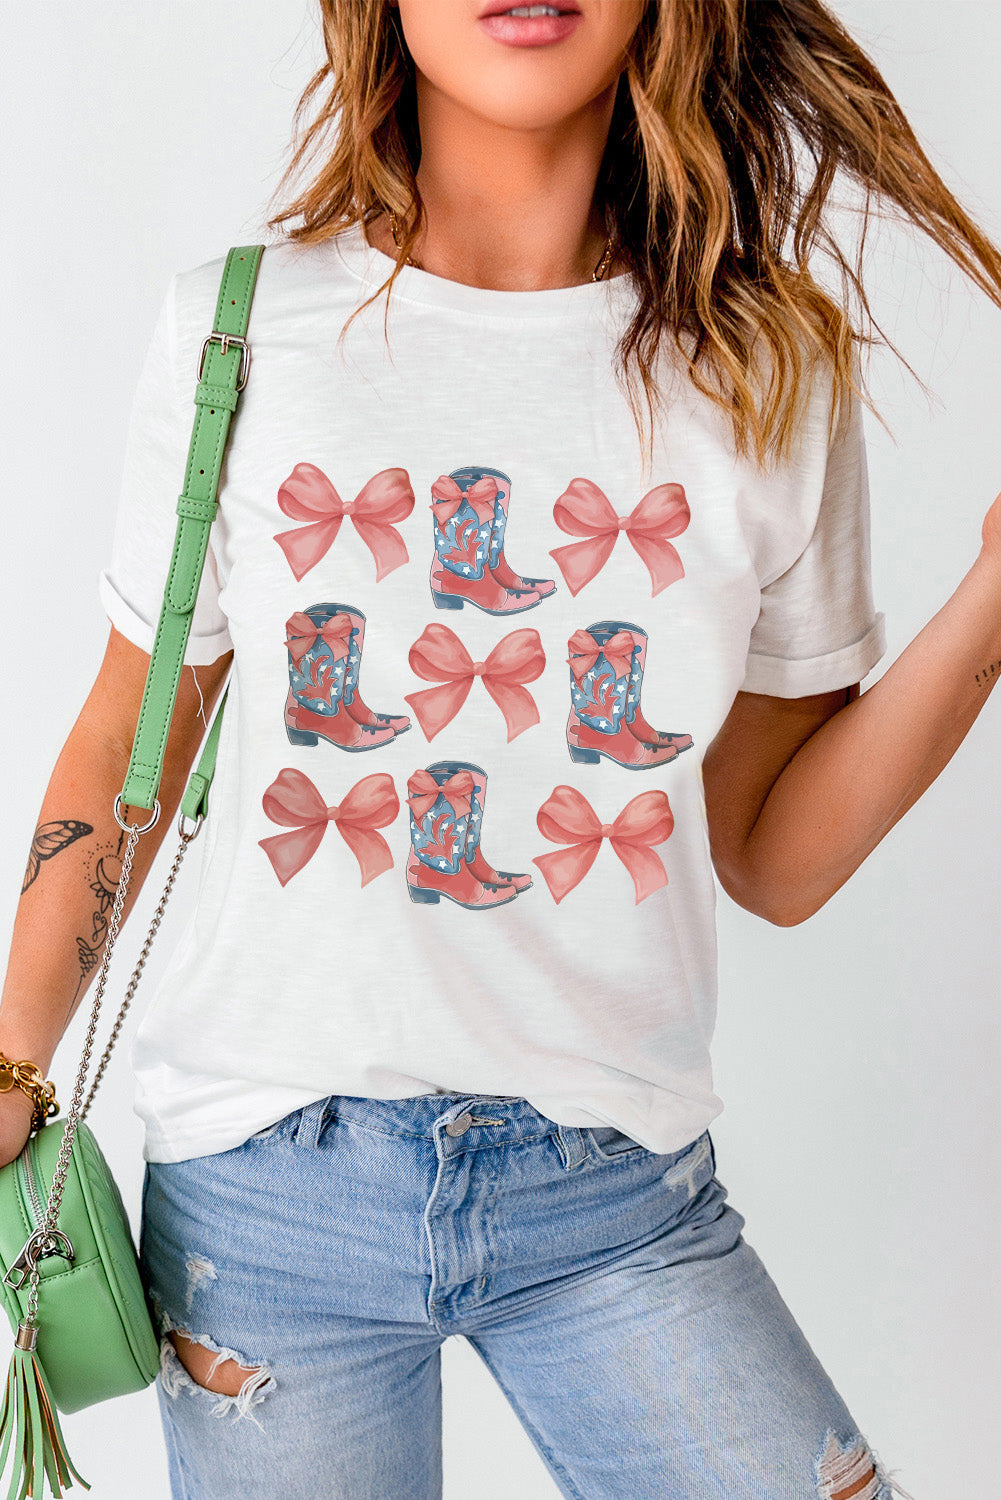 White Bowknot & Cowgirl Boots Graphic Tee Graphic Tees JT's Designer Fashion